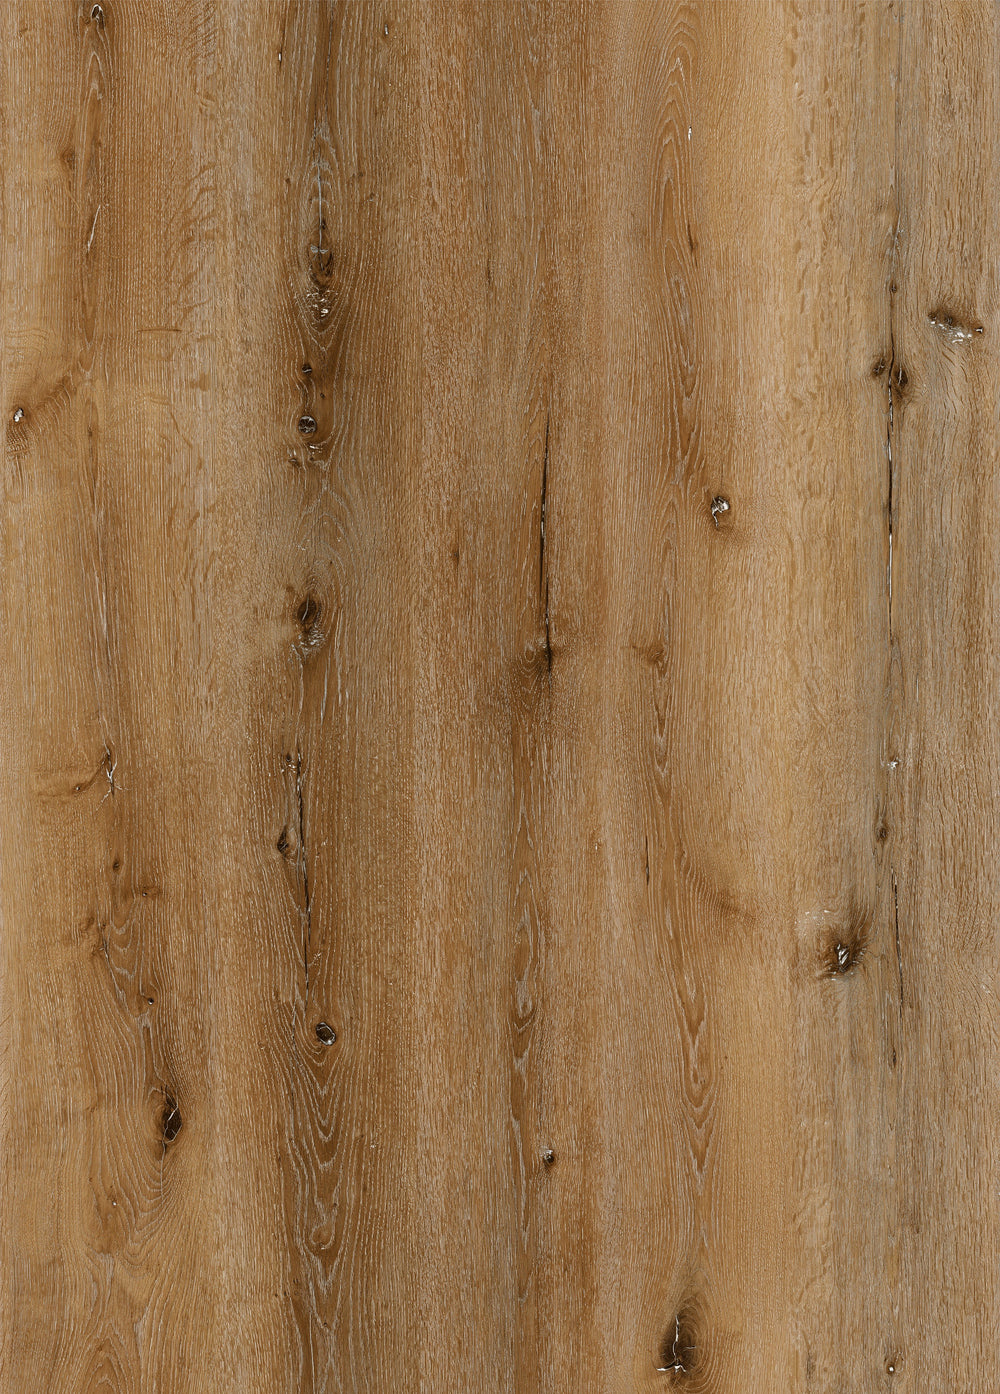 Sequoia - Natural Essence PLUS Collection - Waterproof Flooring by Lions Floor